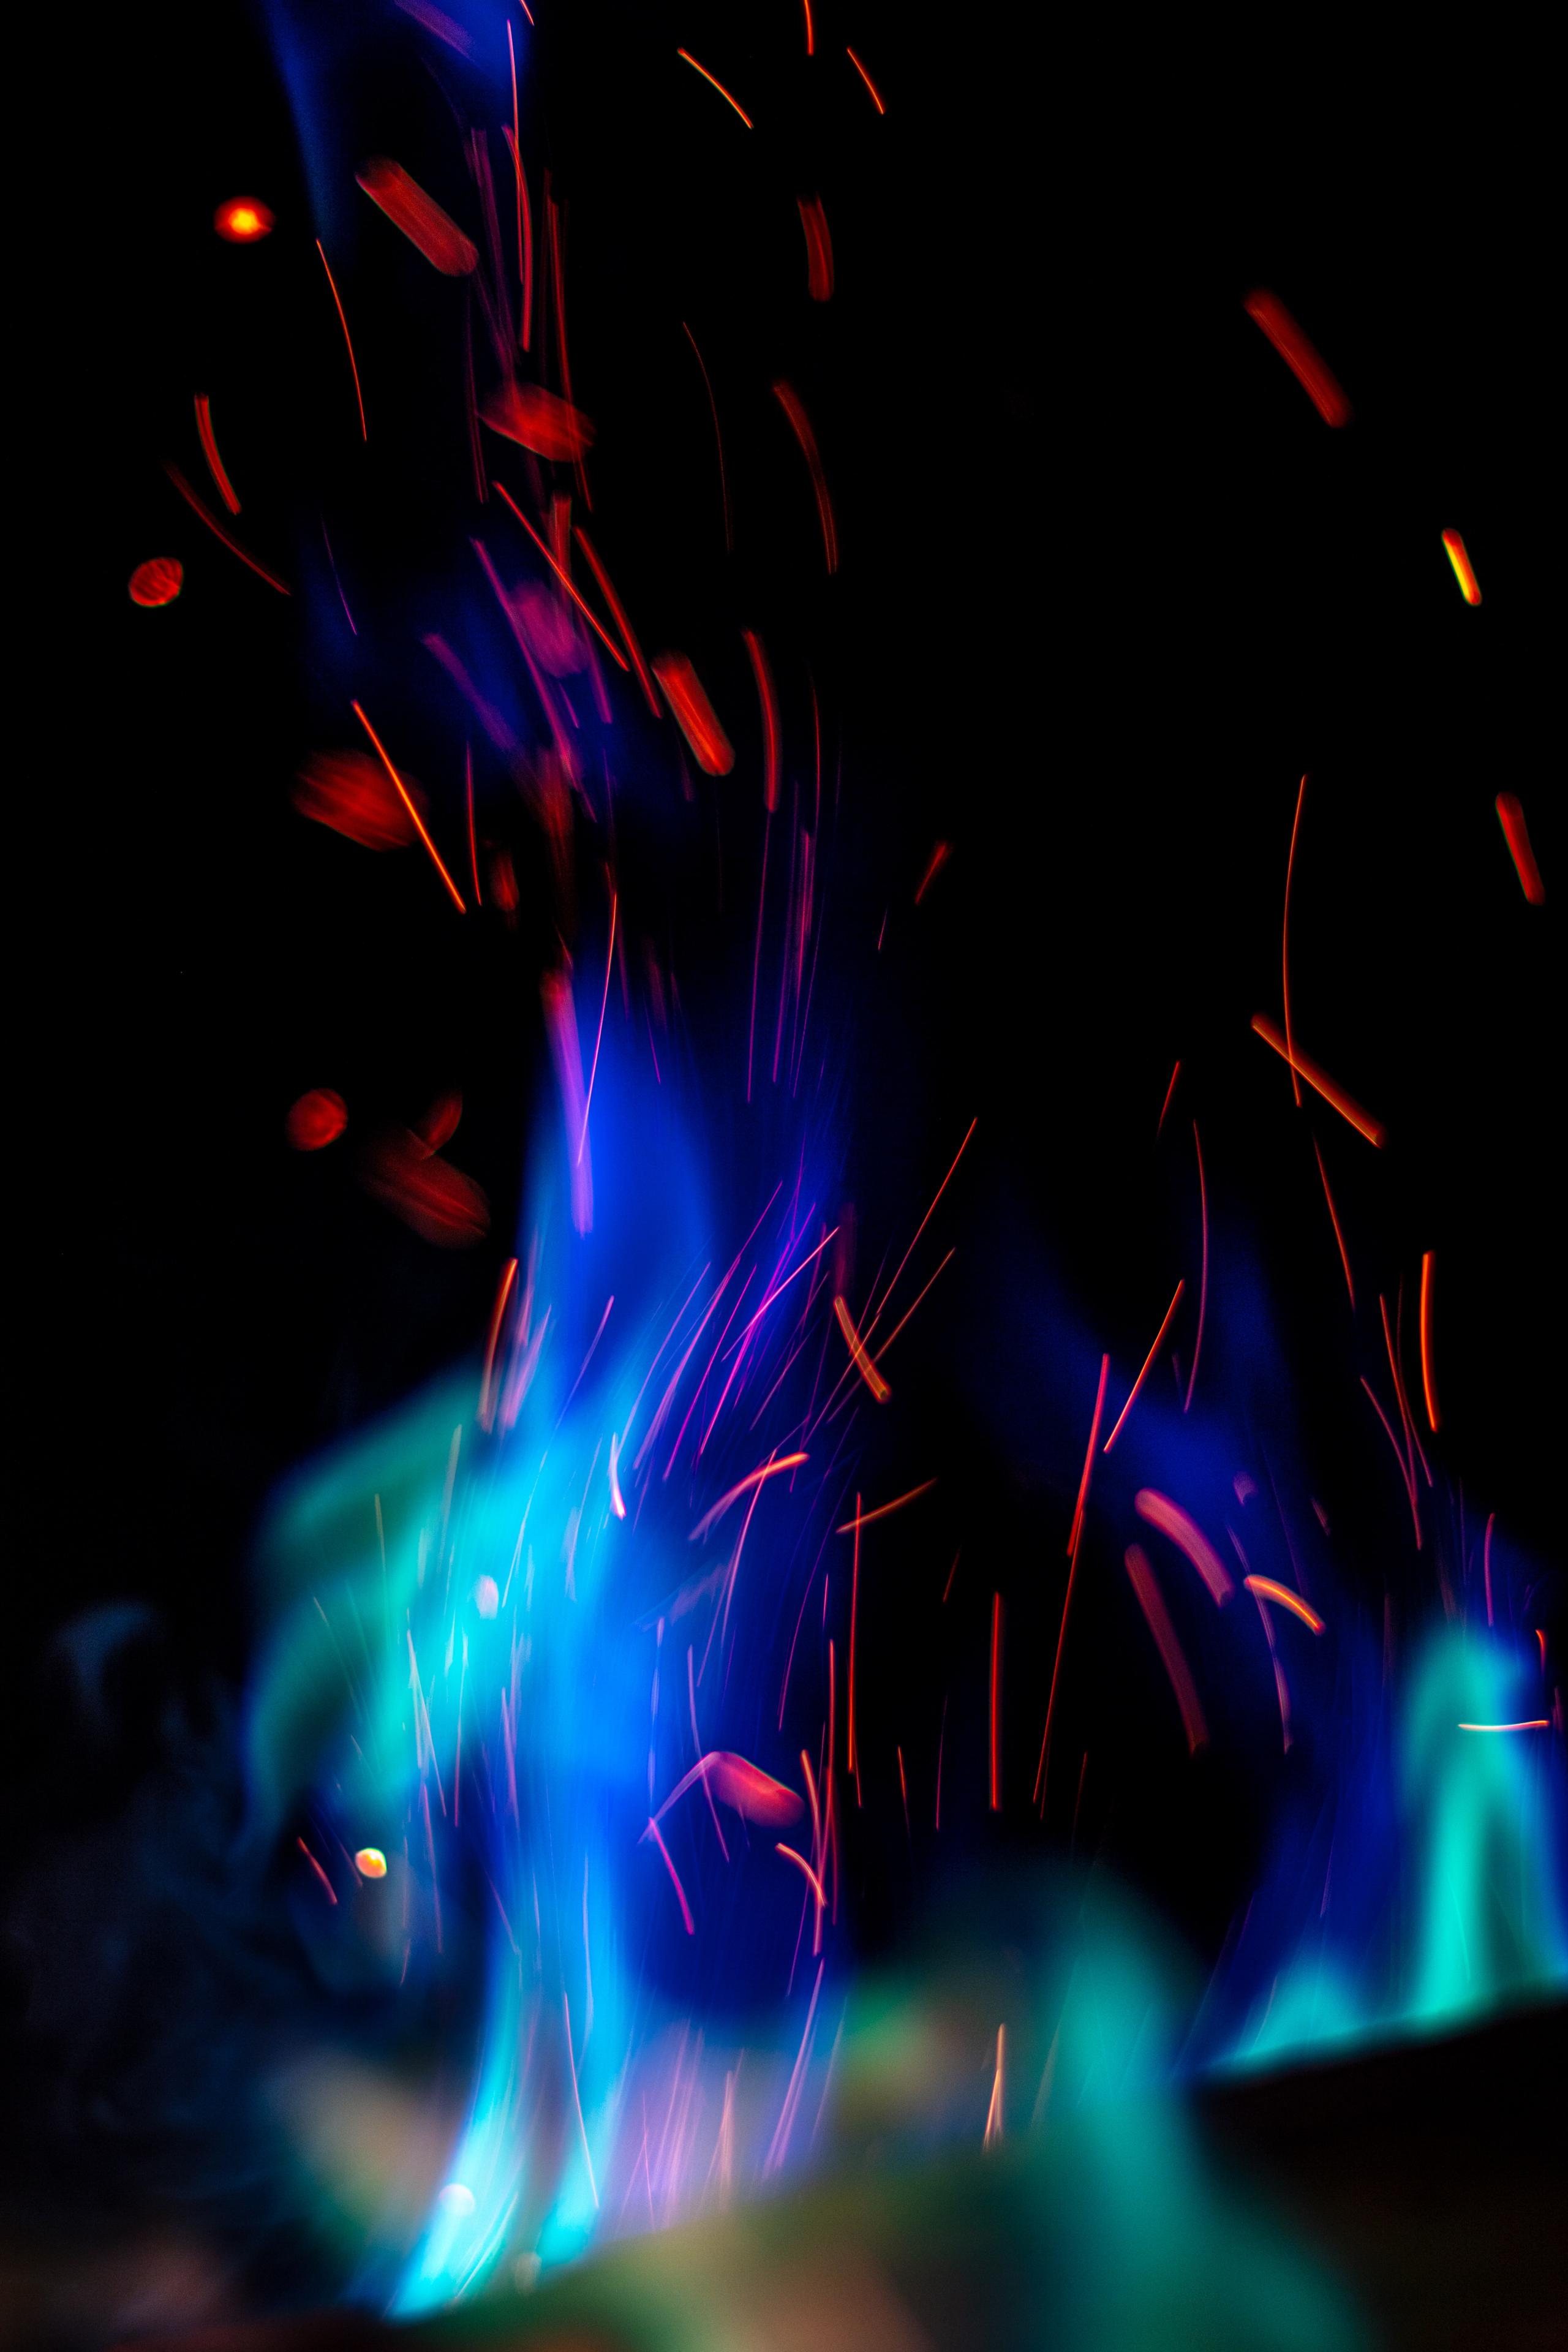 A blue flame emitting red sparks